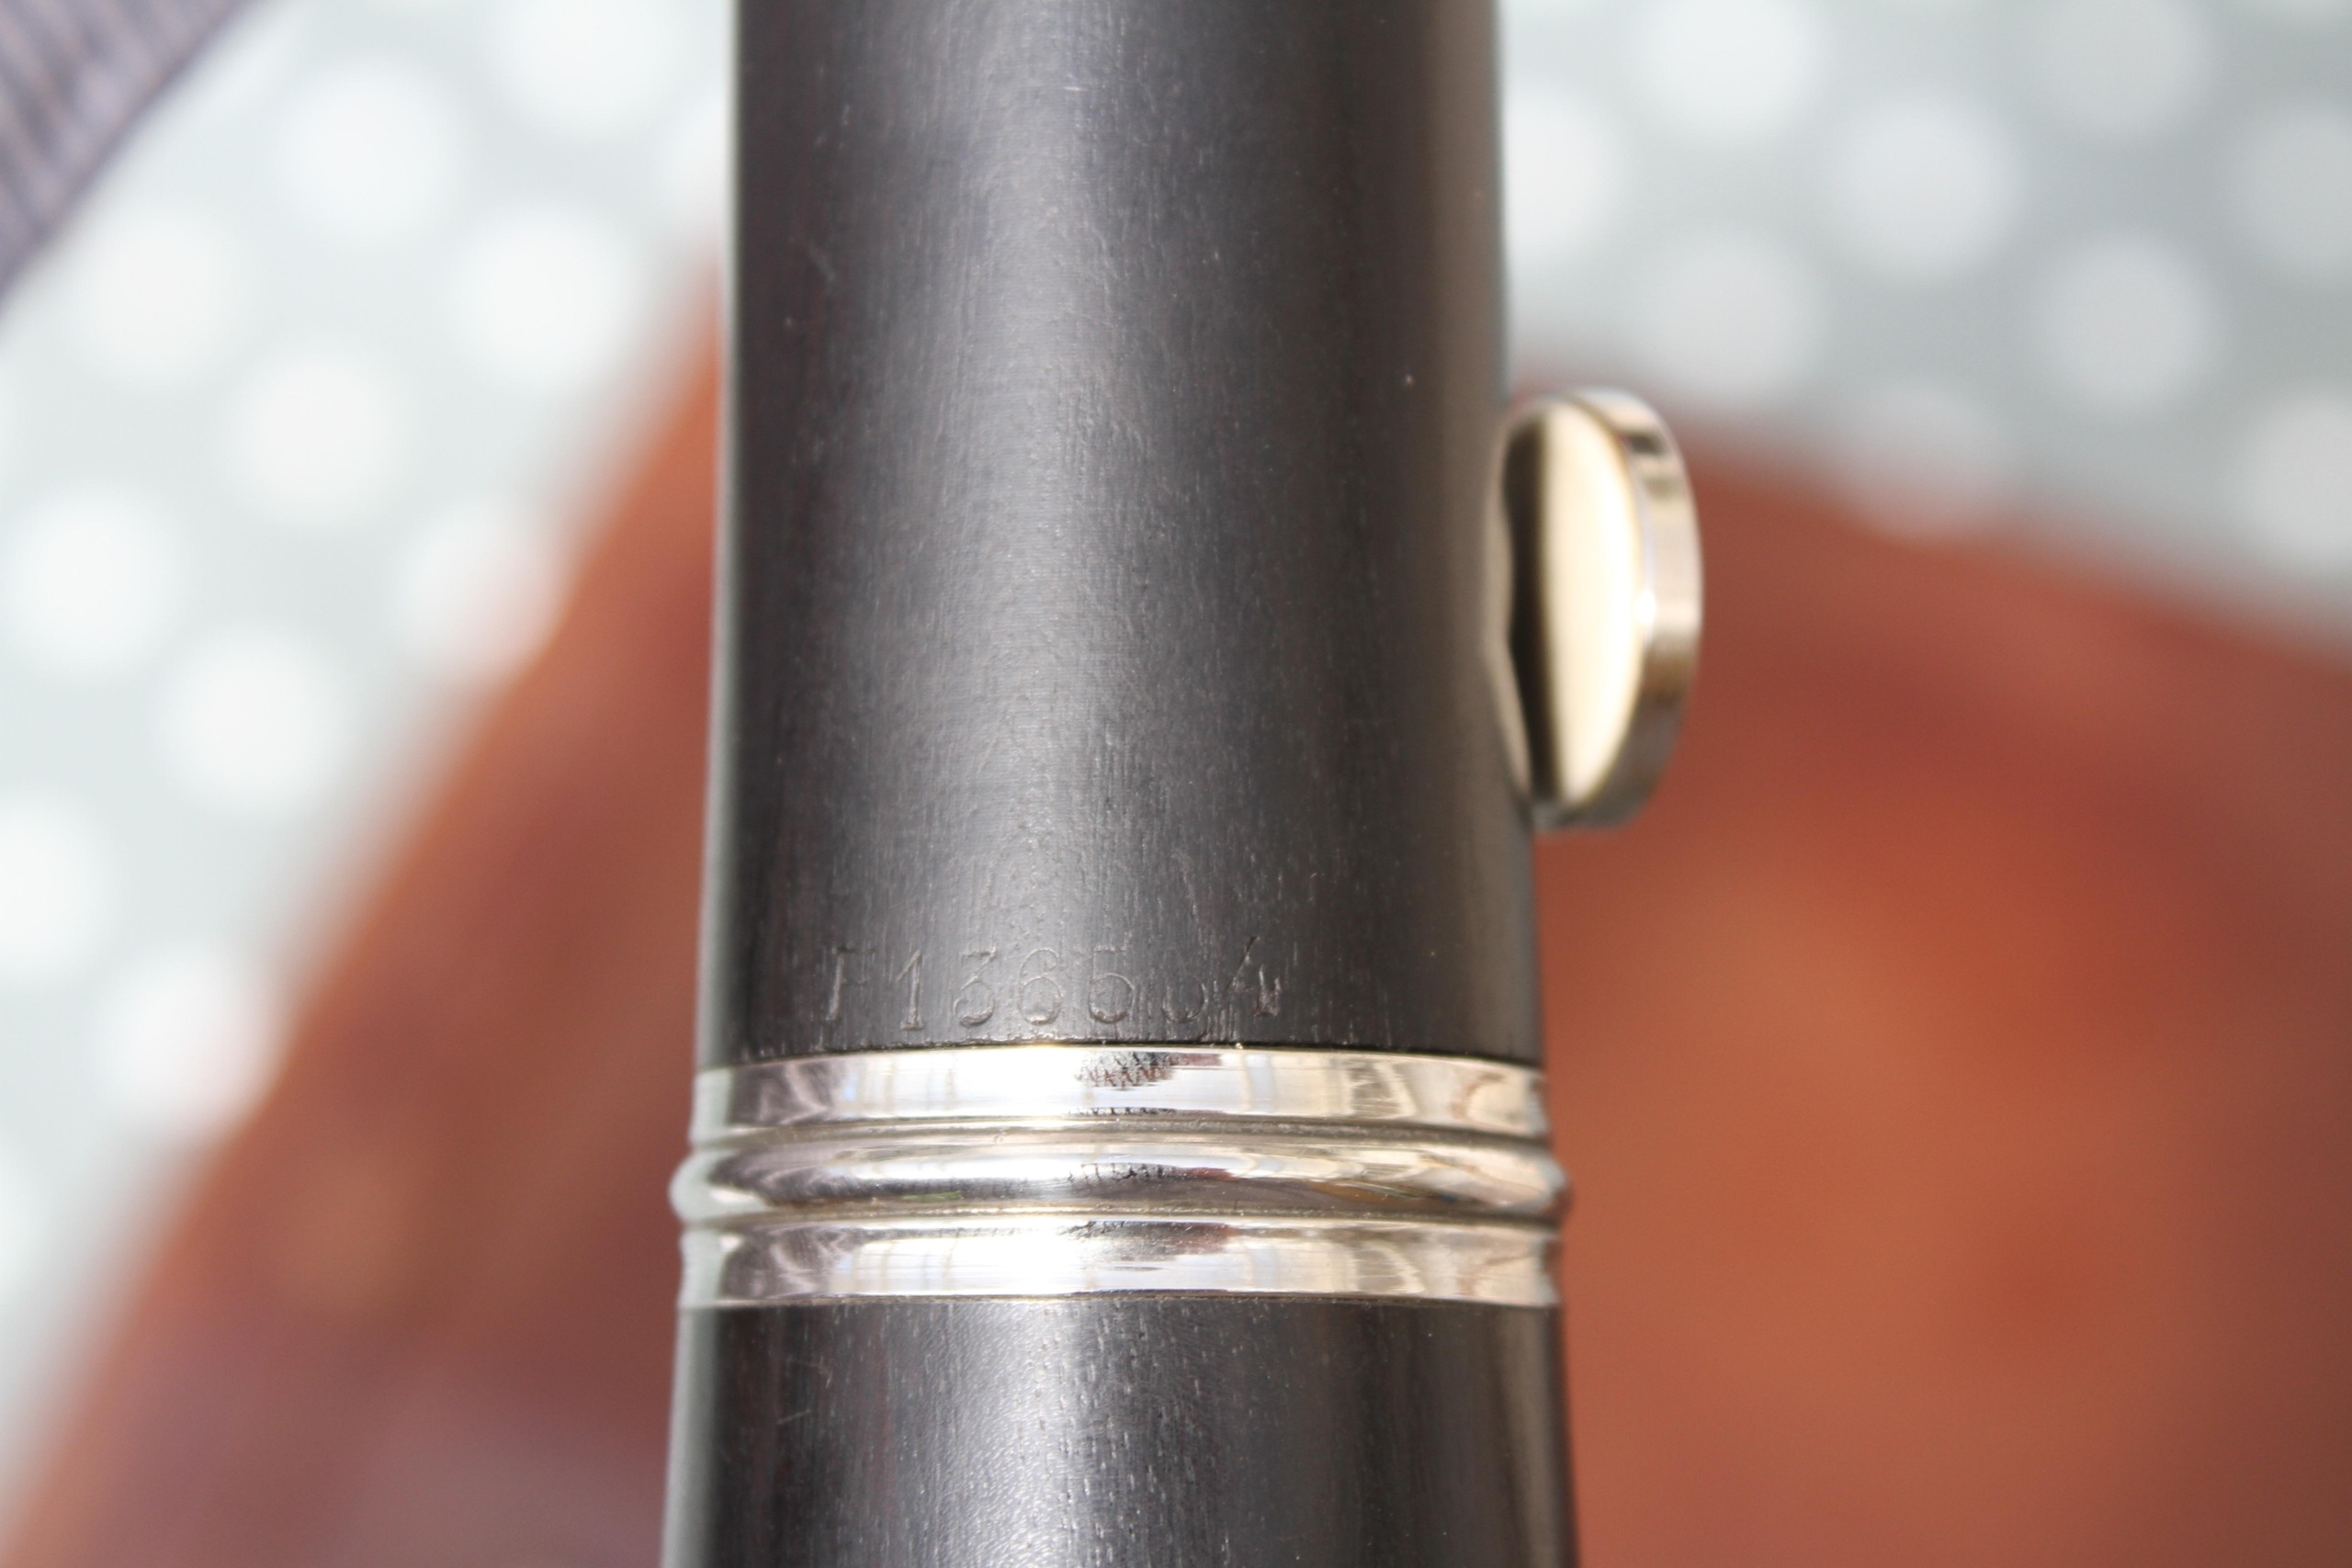 evette buffet clarinet serial numbers